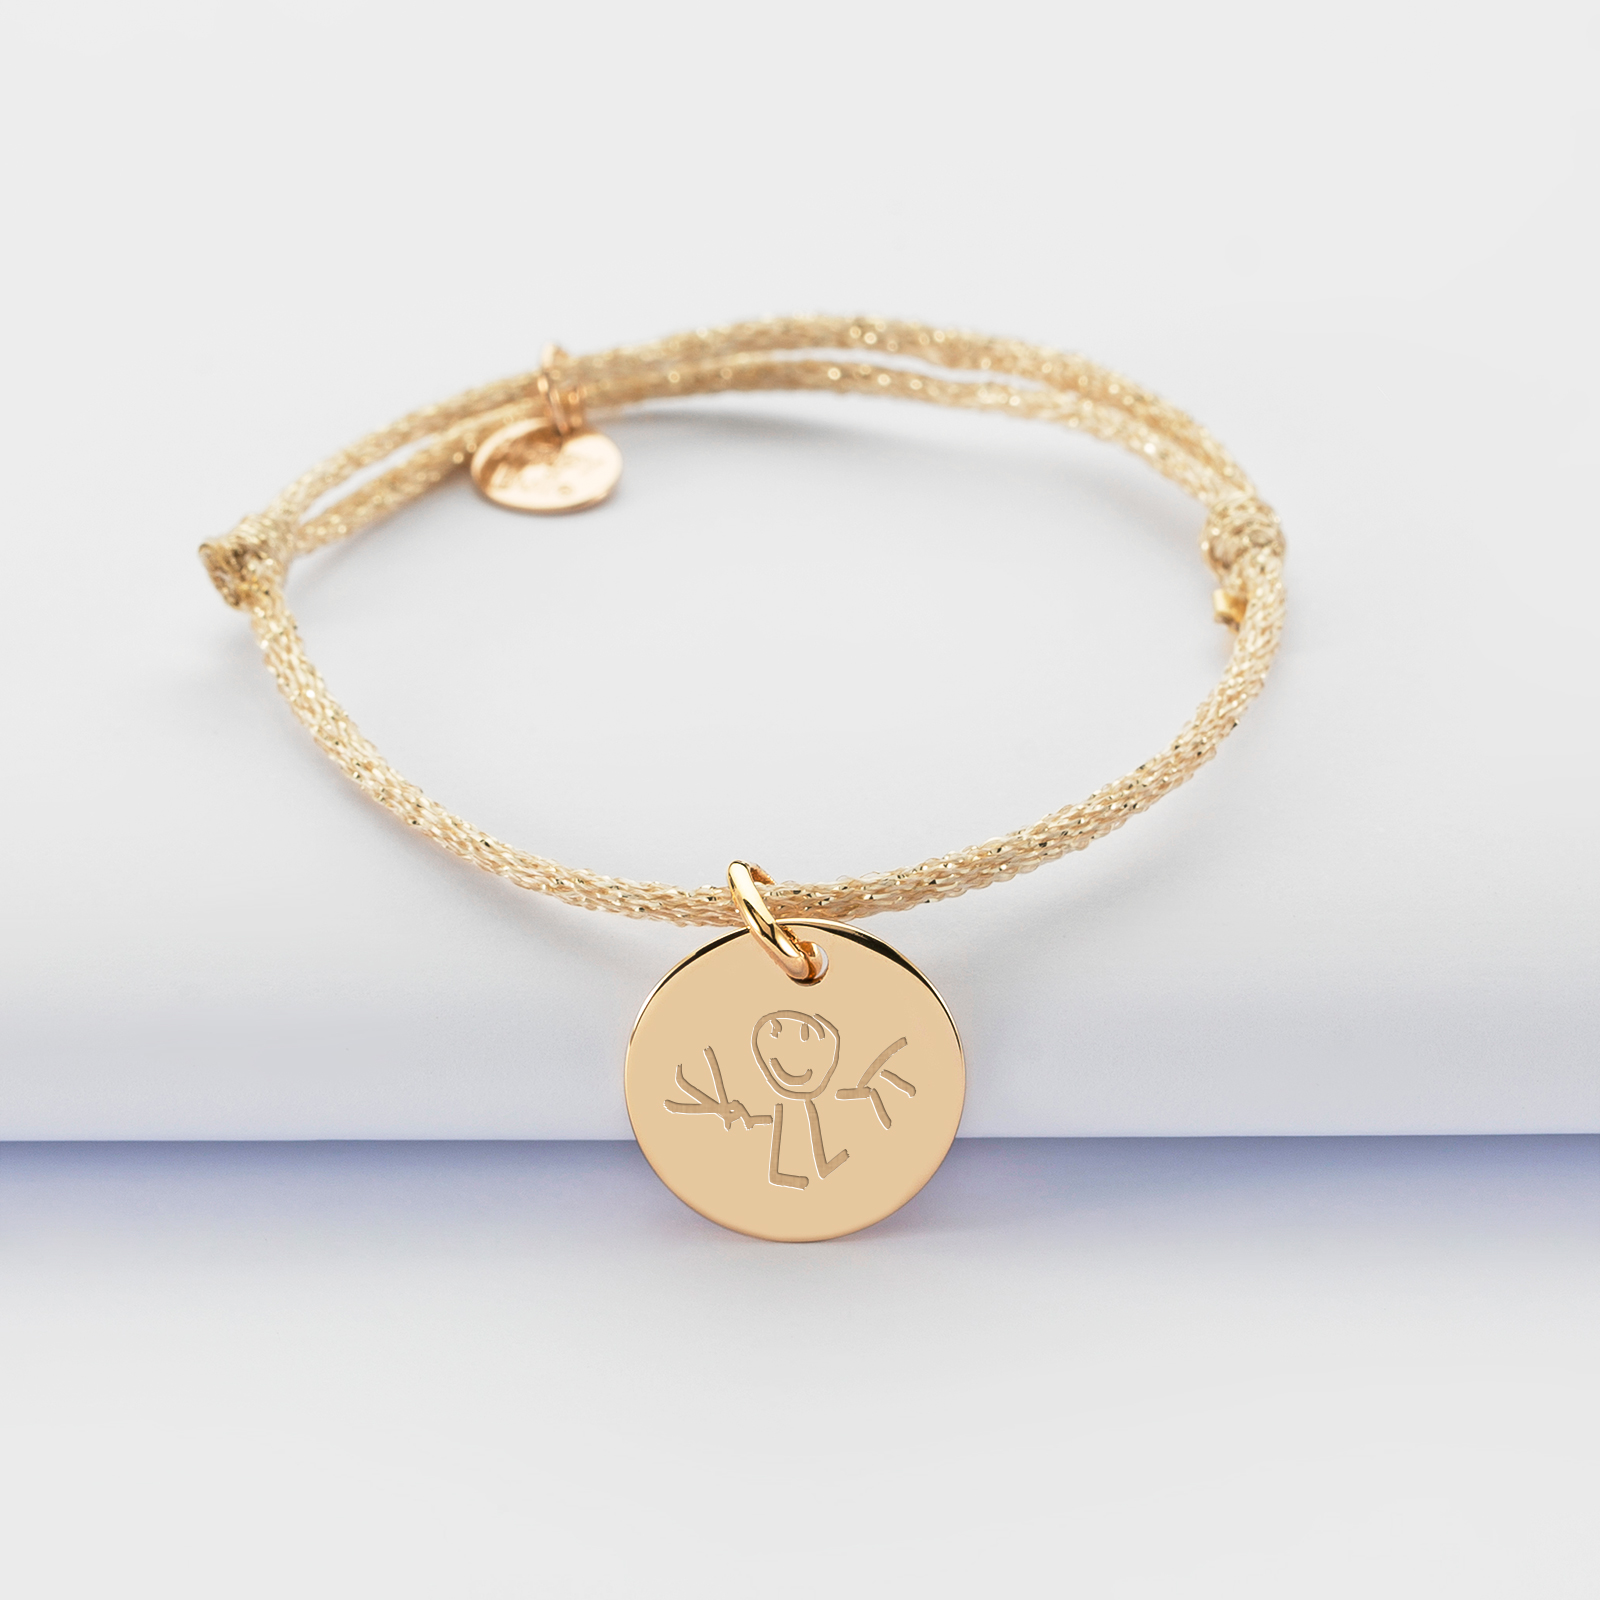 Sparkly cord children's bracelet with personalised engraved gold plated medallion 15 mm - sketch